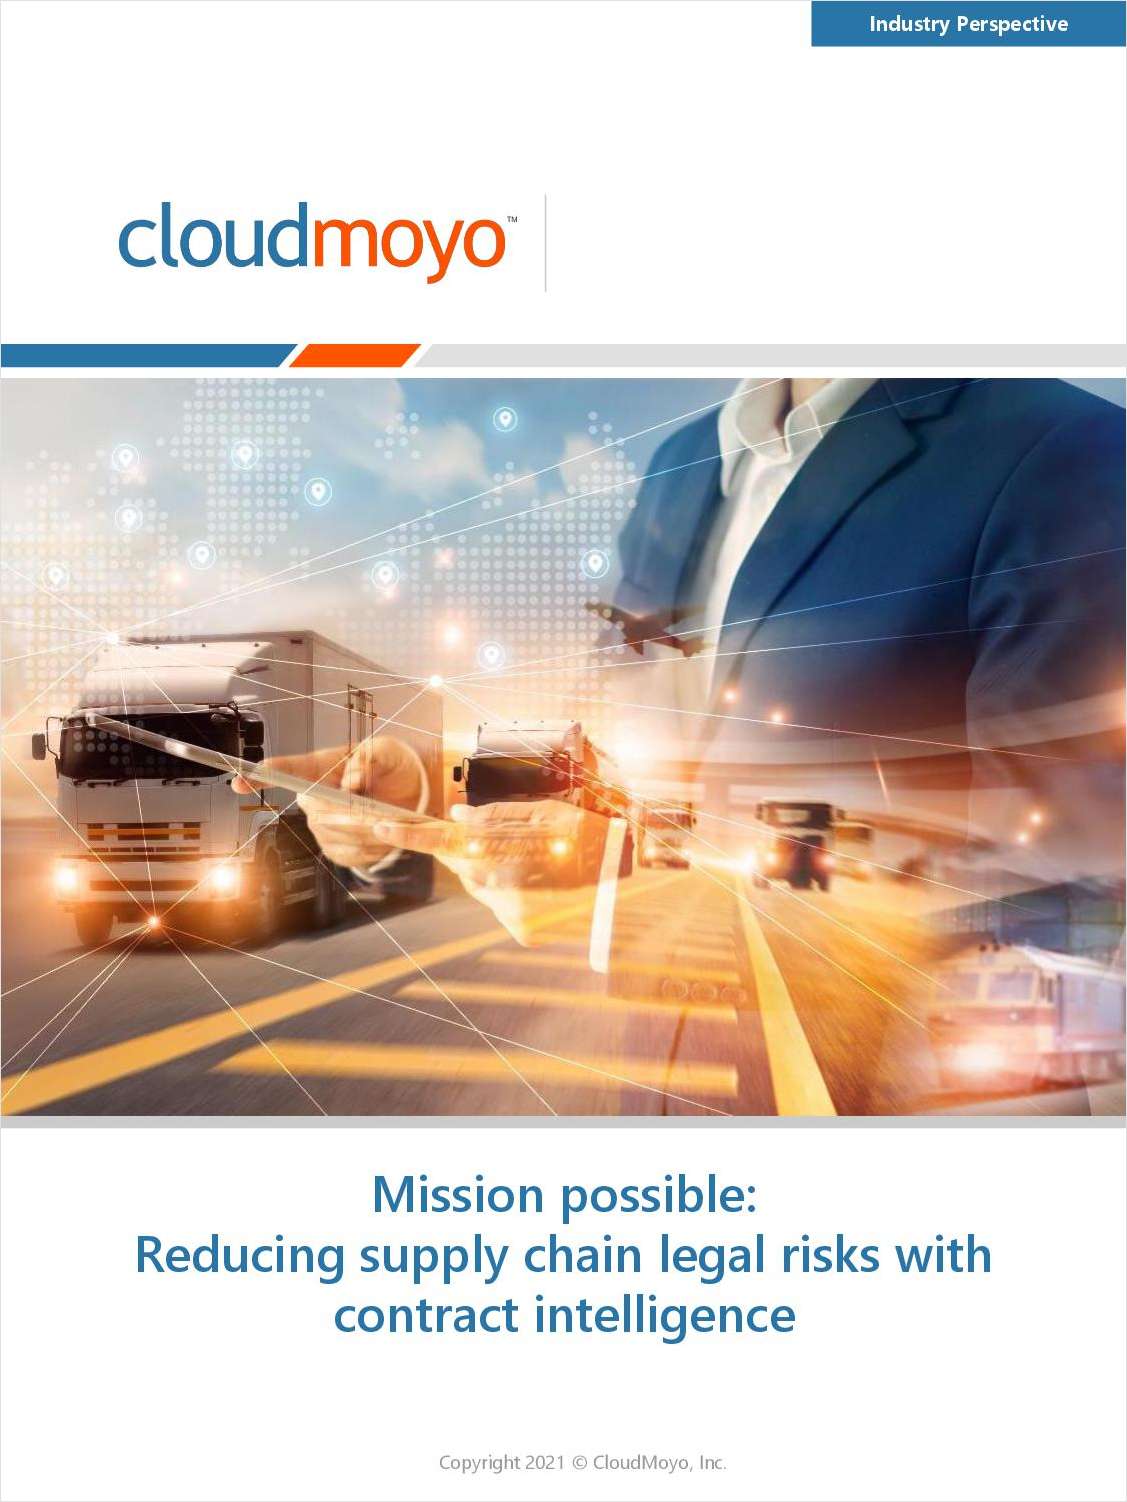 Mission possible: Reducing supply chain legal risks with contract intelligence